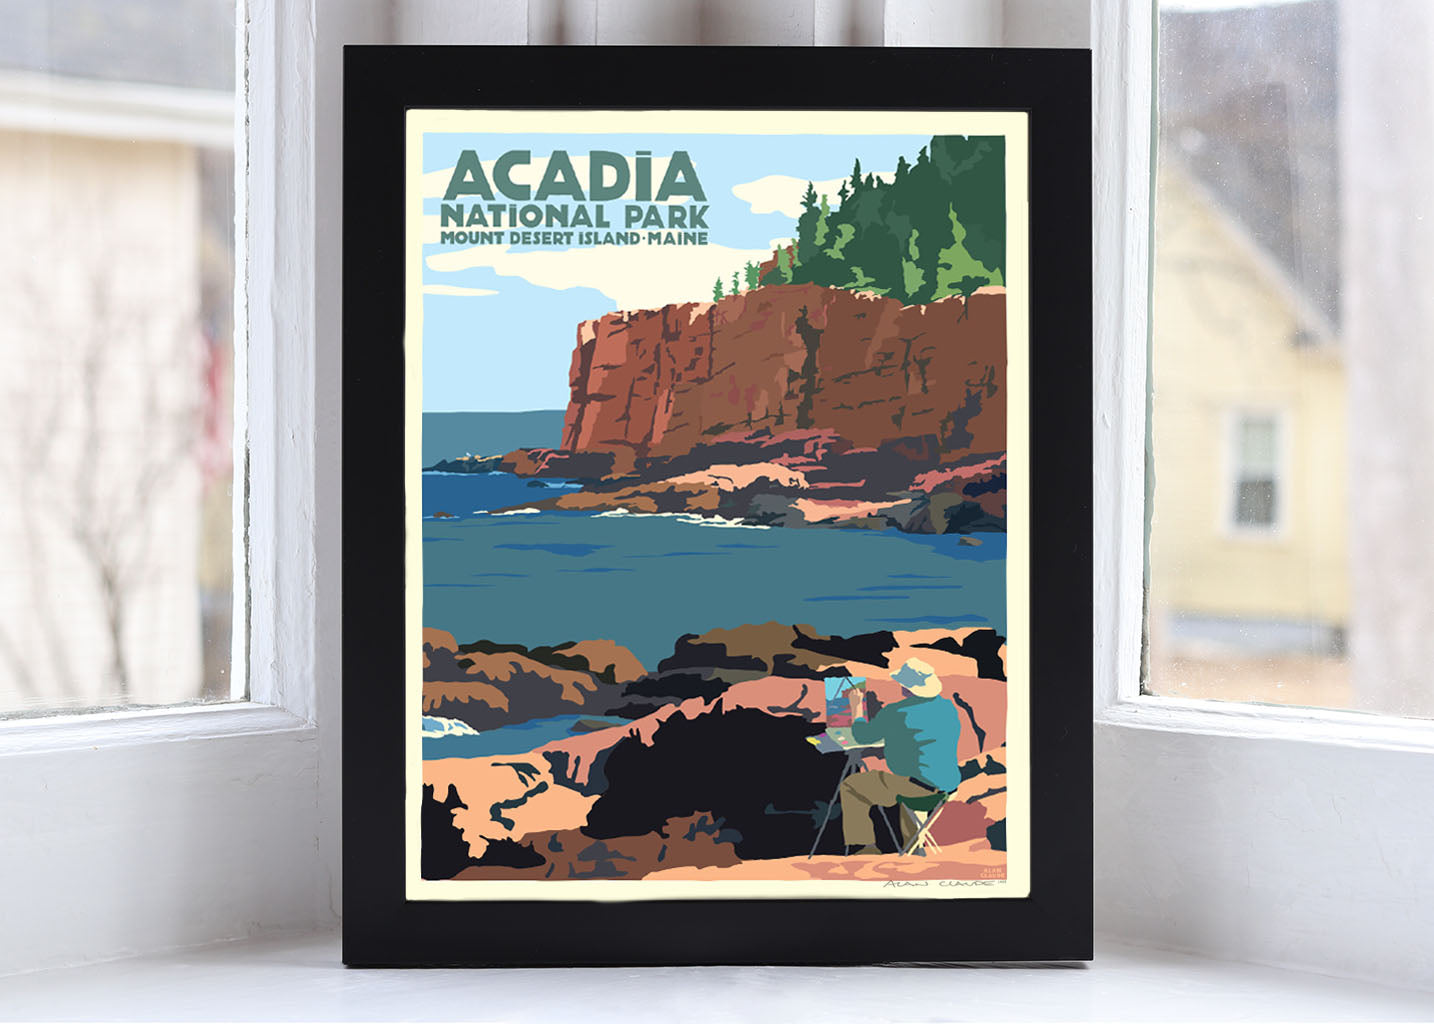 Painting In Acadia National Park Art Print 8" x 10" Framed Wall Poster By Alan Claude - Maine